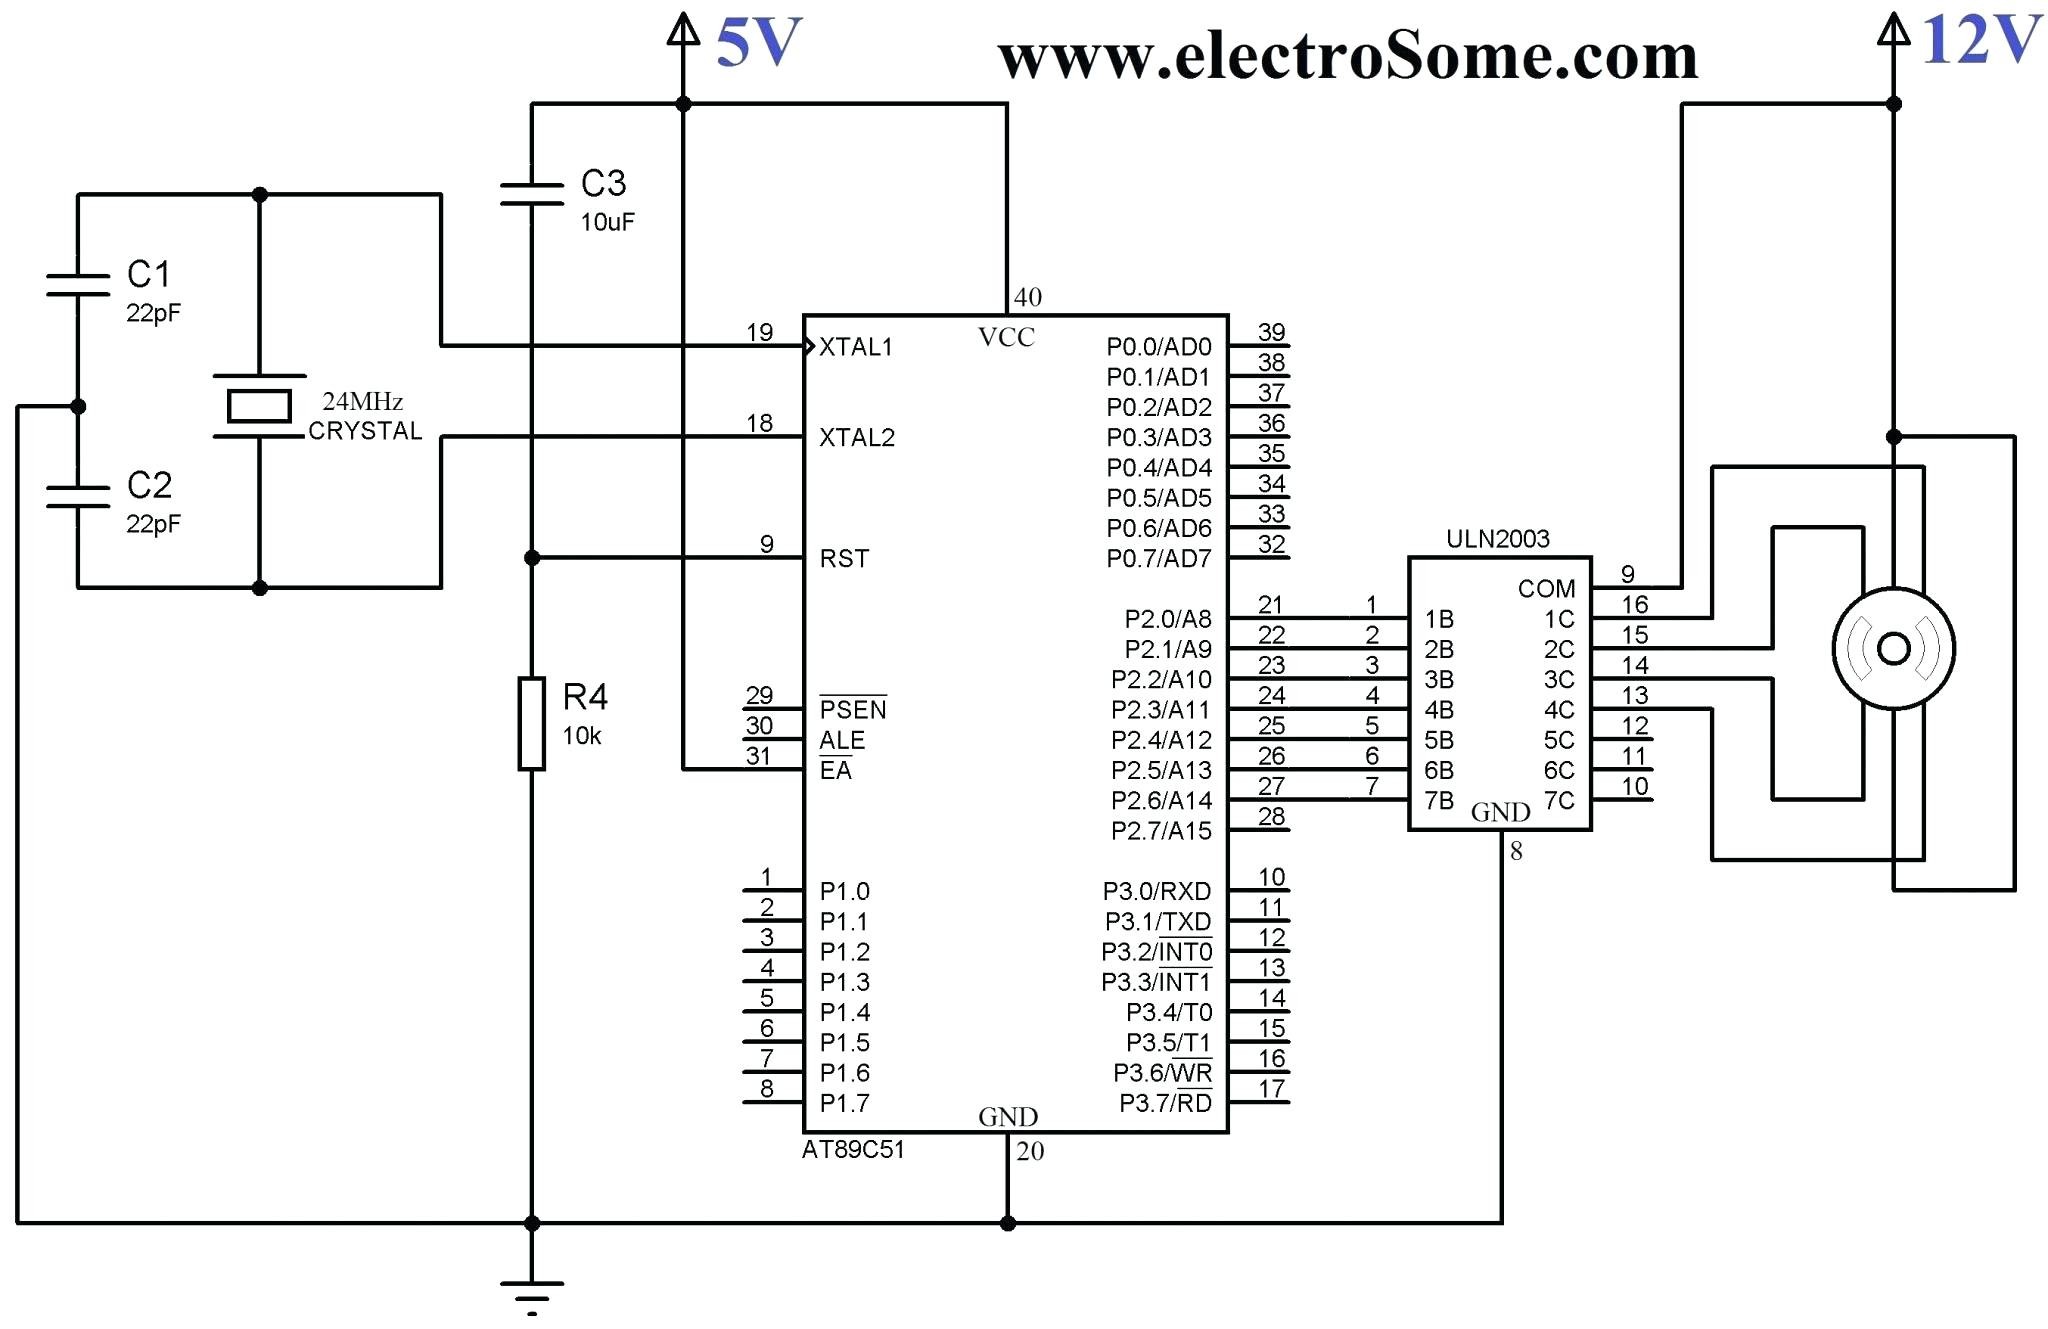 Wiring Diagram Lighting With cell Contactor